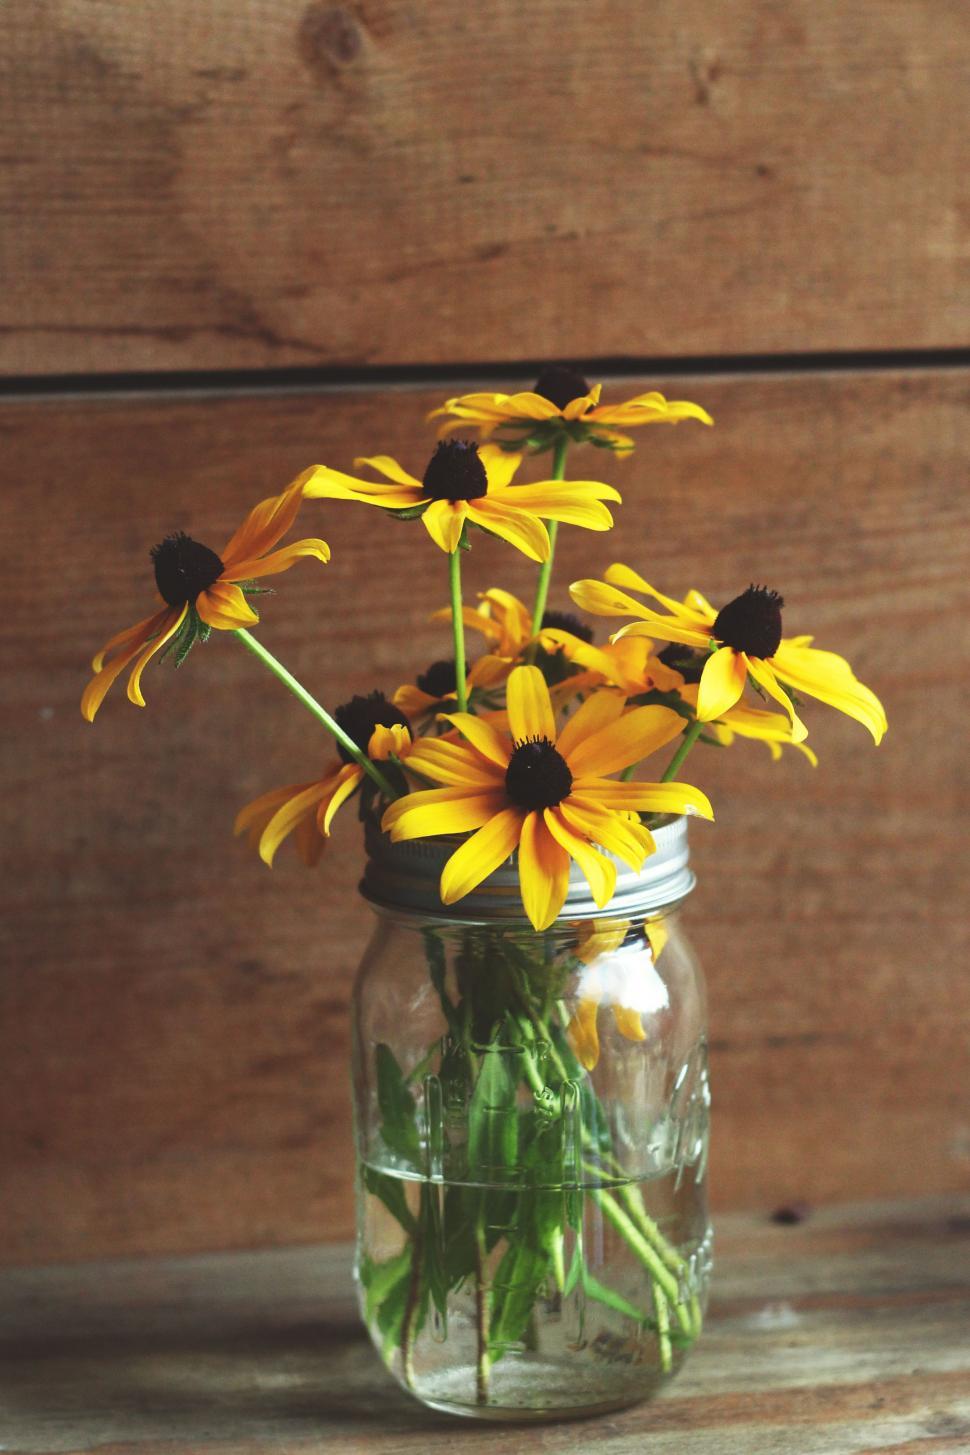 Free Image of Mason Jar Filled With Yellow Flowers on Wooden Table 